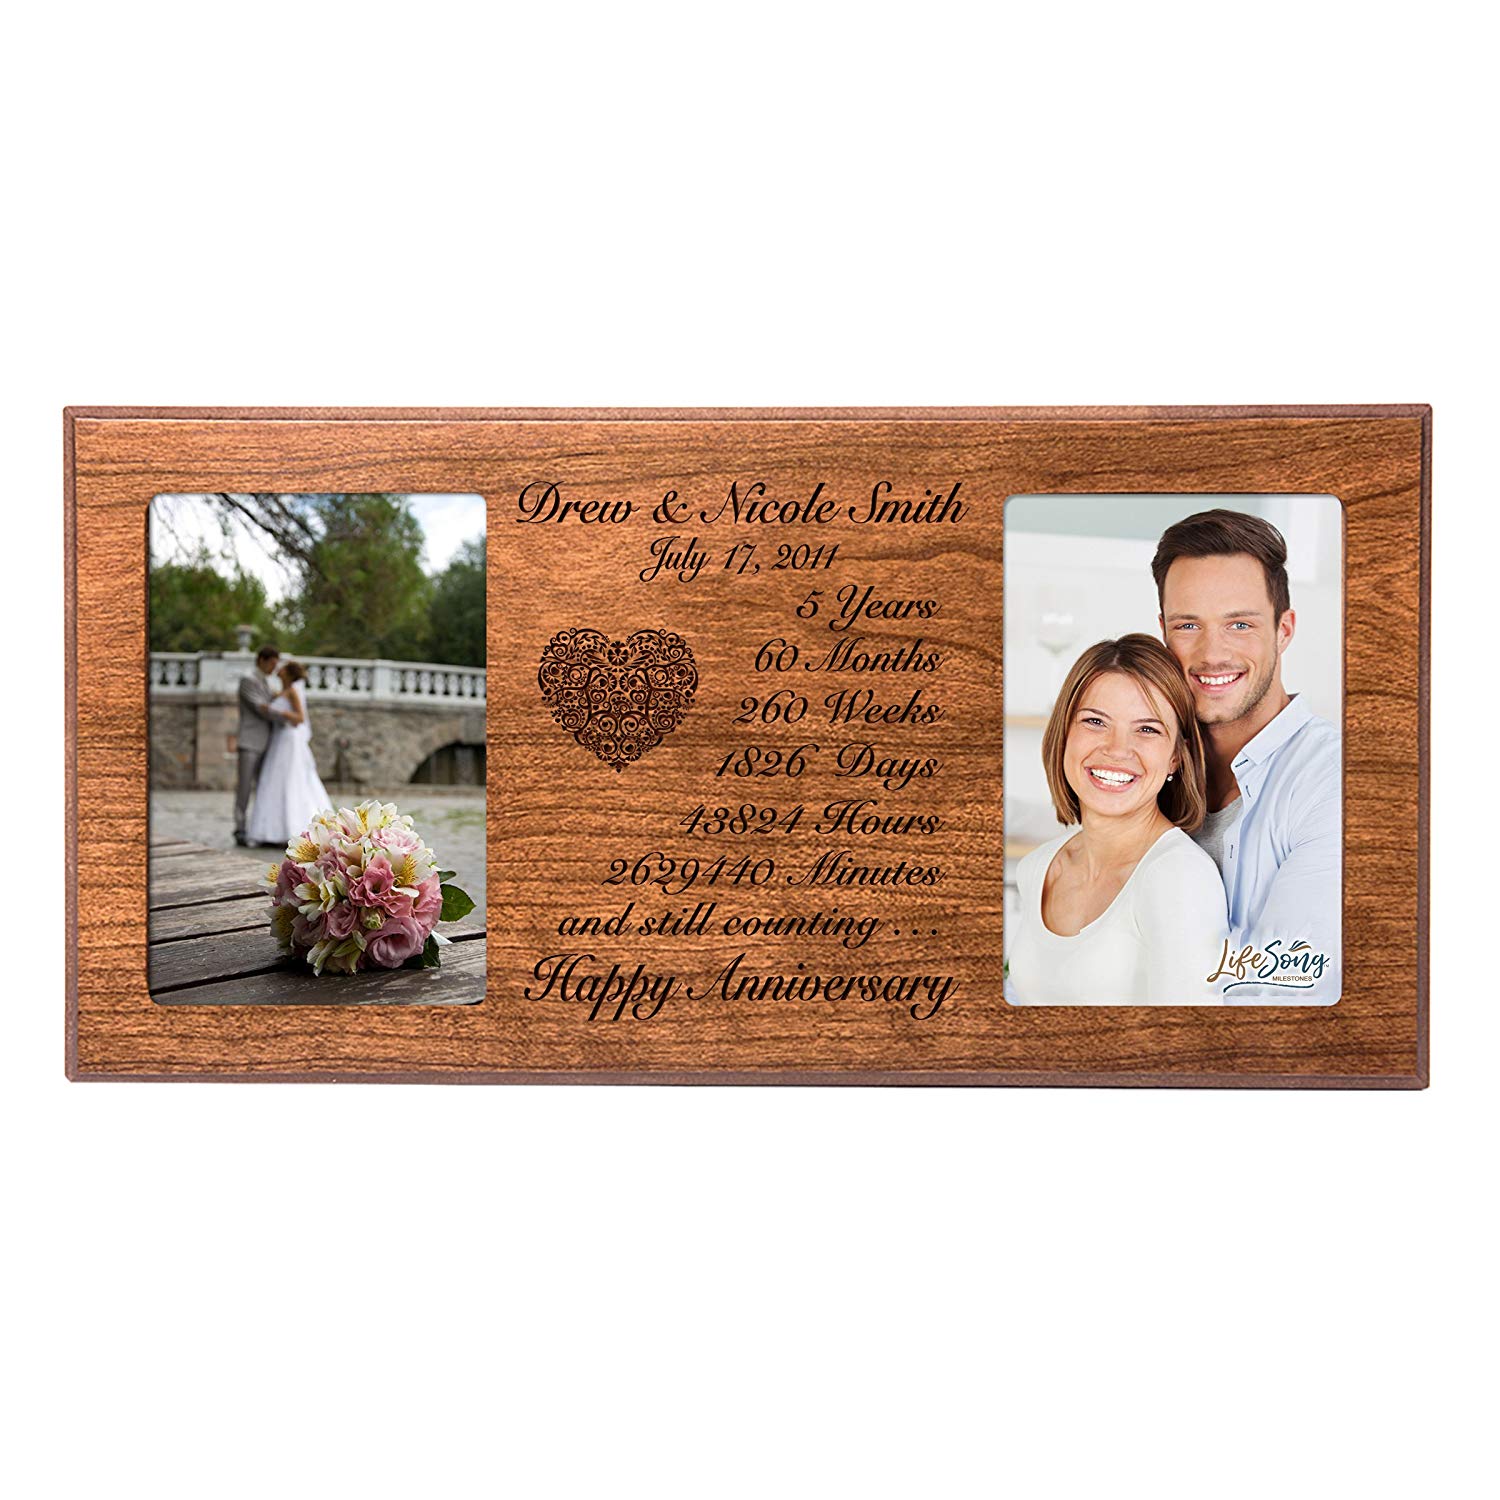 Lifesong Milestones Personalized Picture Frame for Couples 5th Wedding Anniversary Decorations